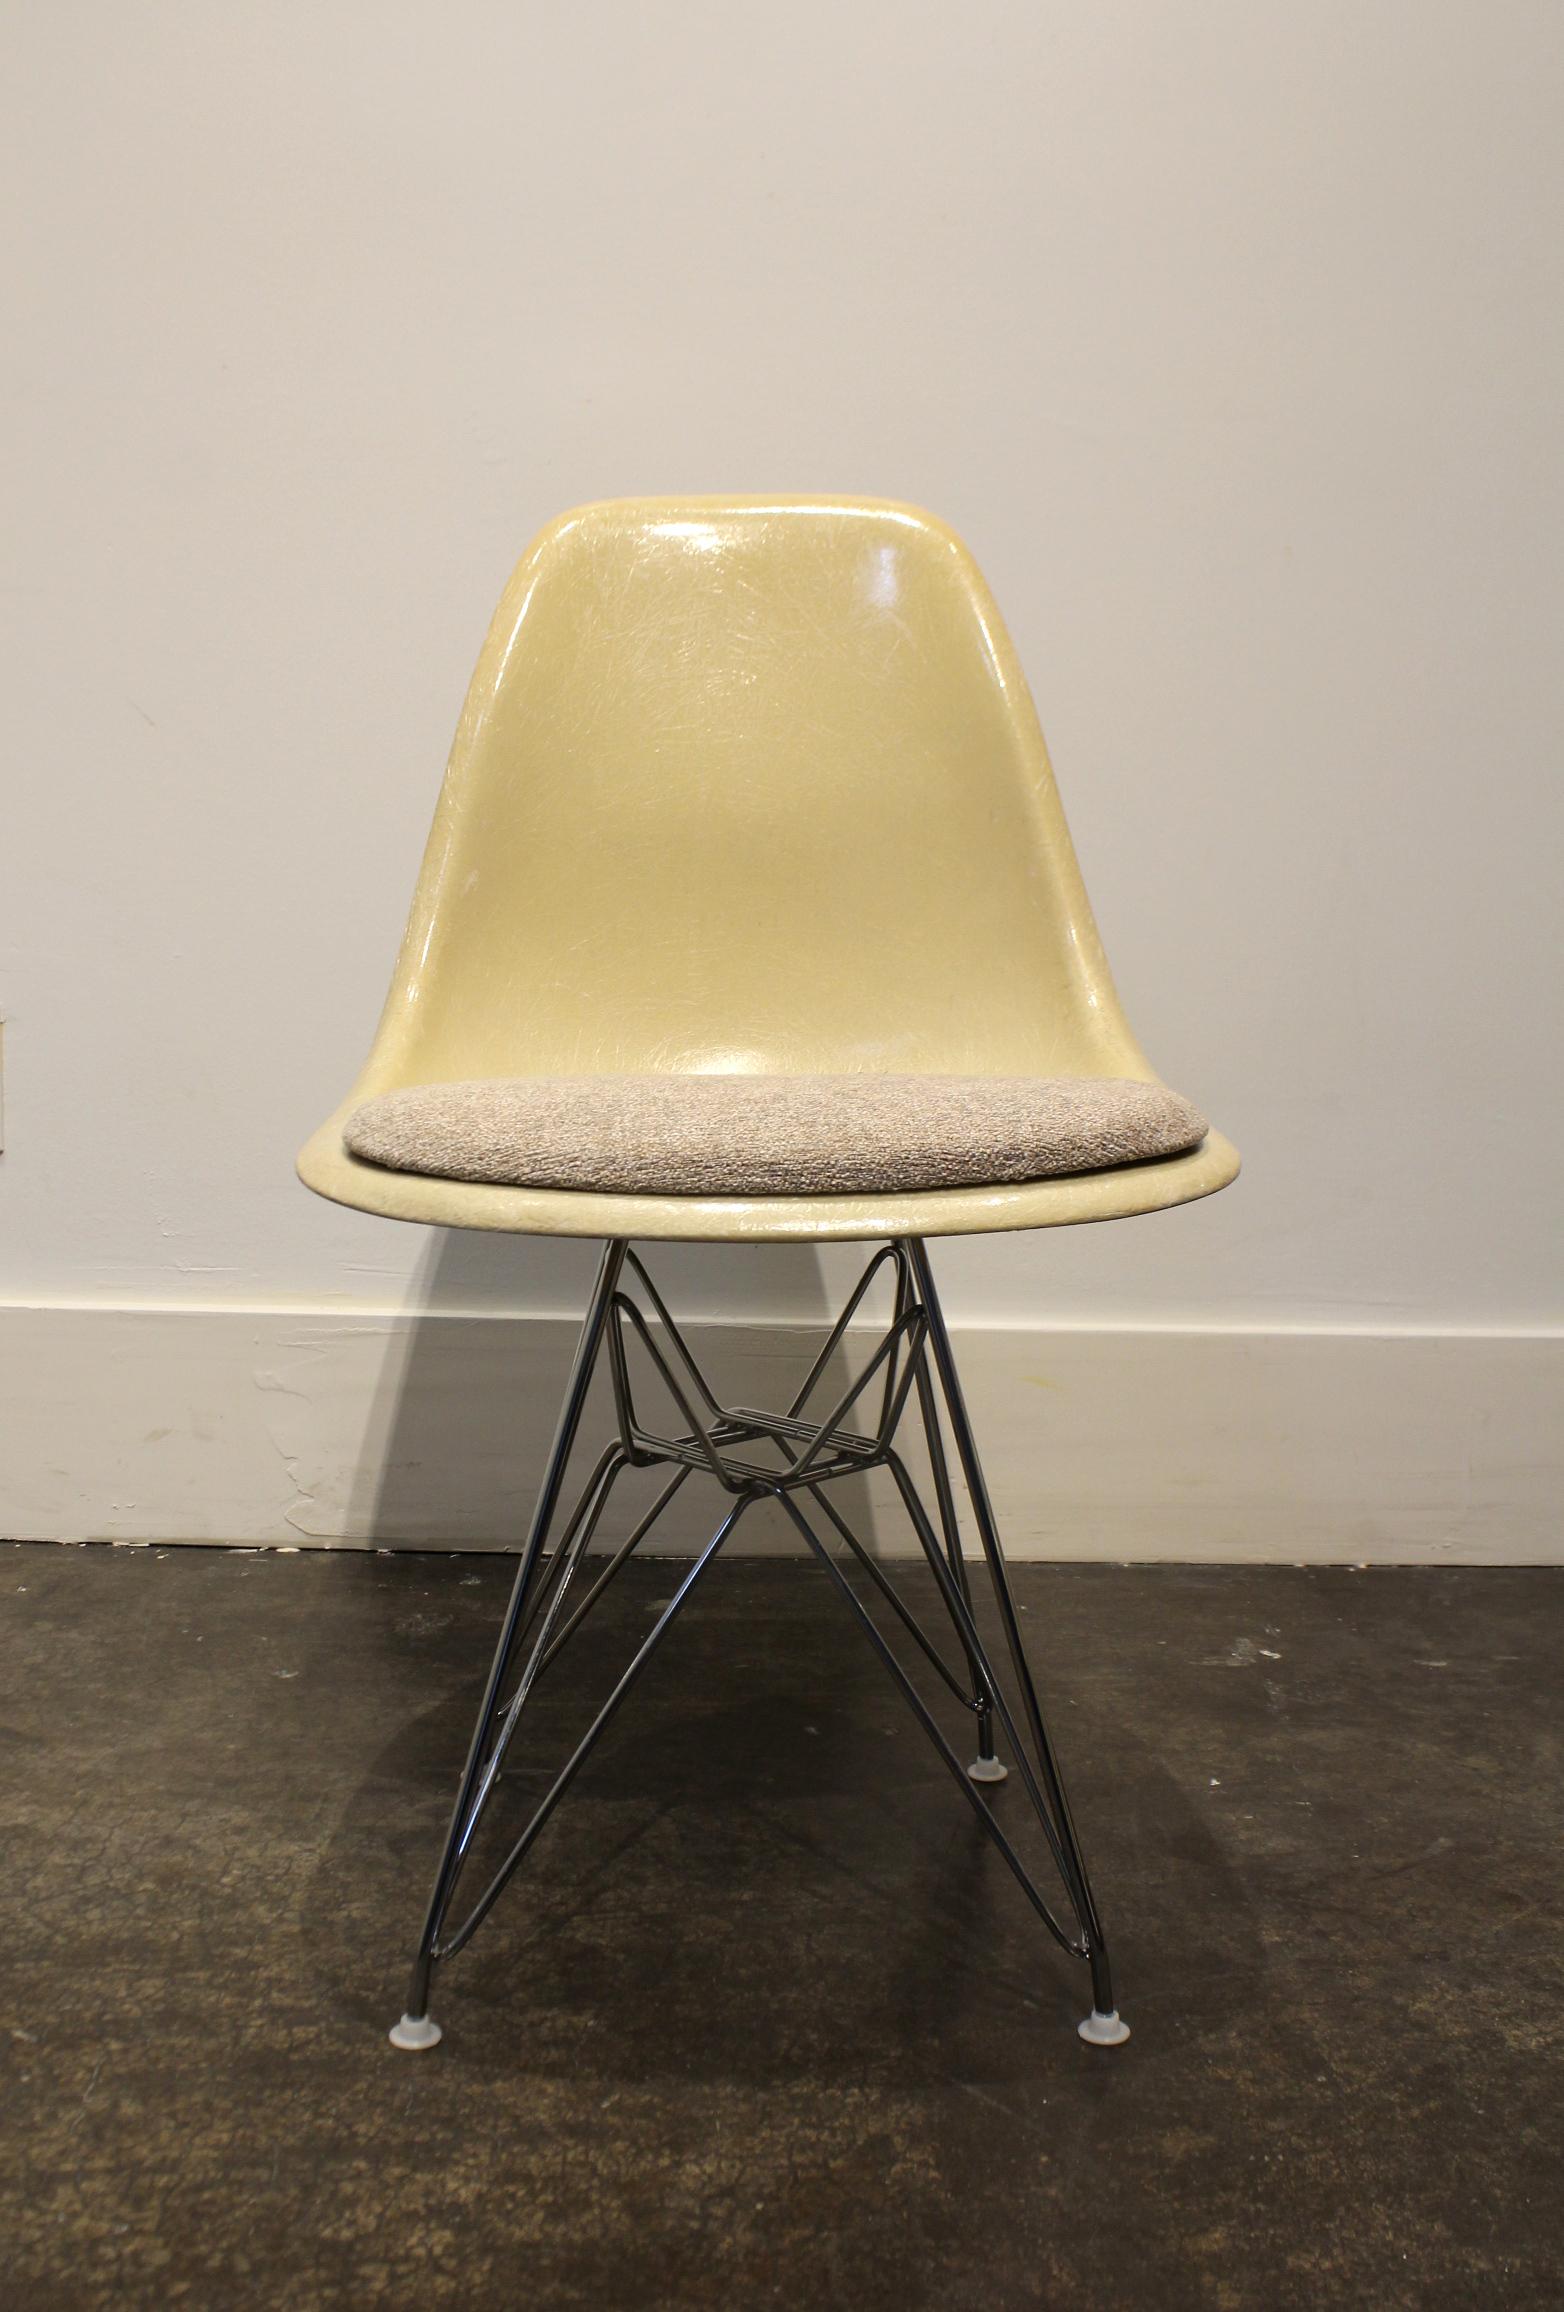 American Eames for Herman Miller Fiberglass Side Chairs Eiffel Tower Base 12 Available For Sale